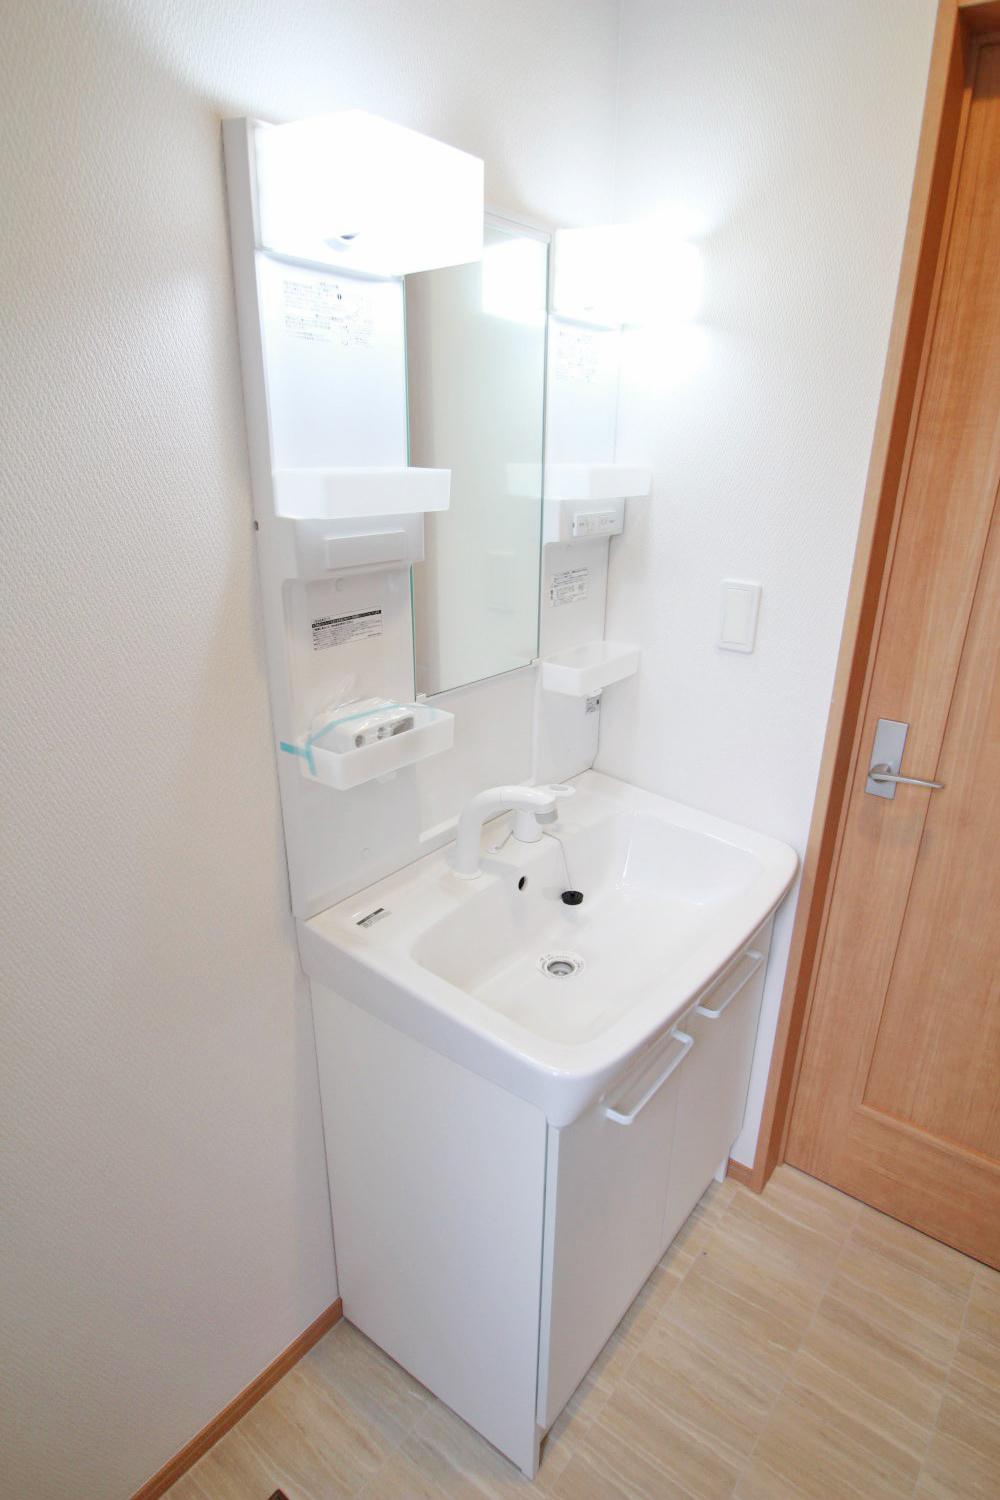 Wash basin, toilet. In vanity with shampoo dresser, Shan is also possible in the morning.